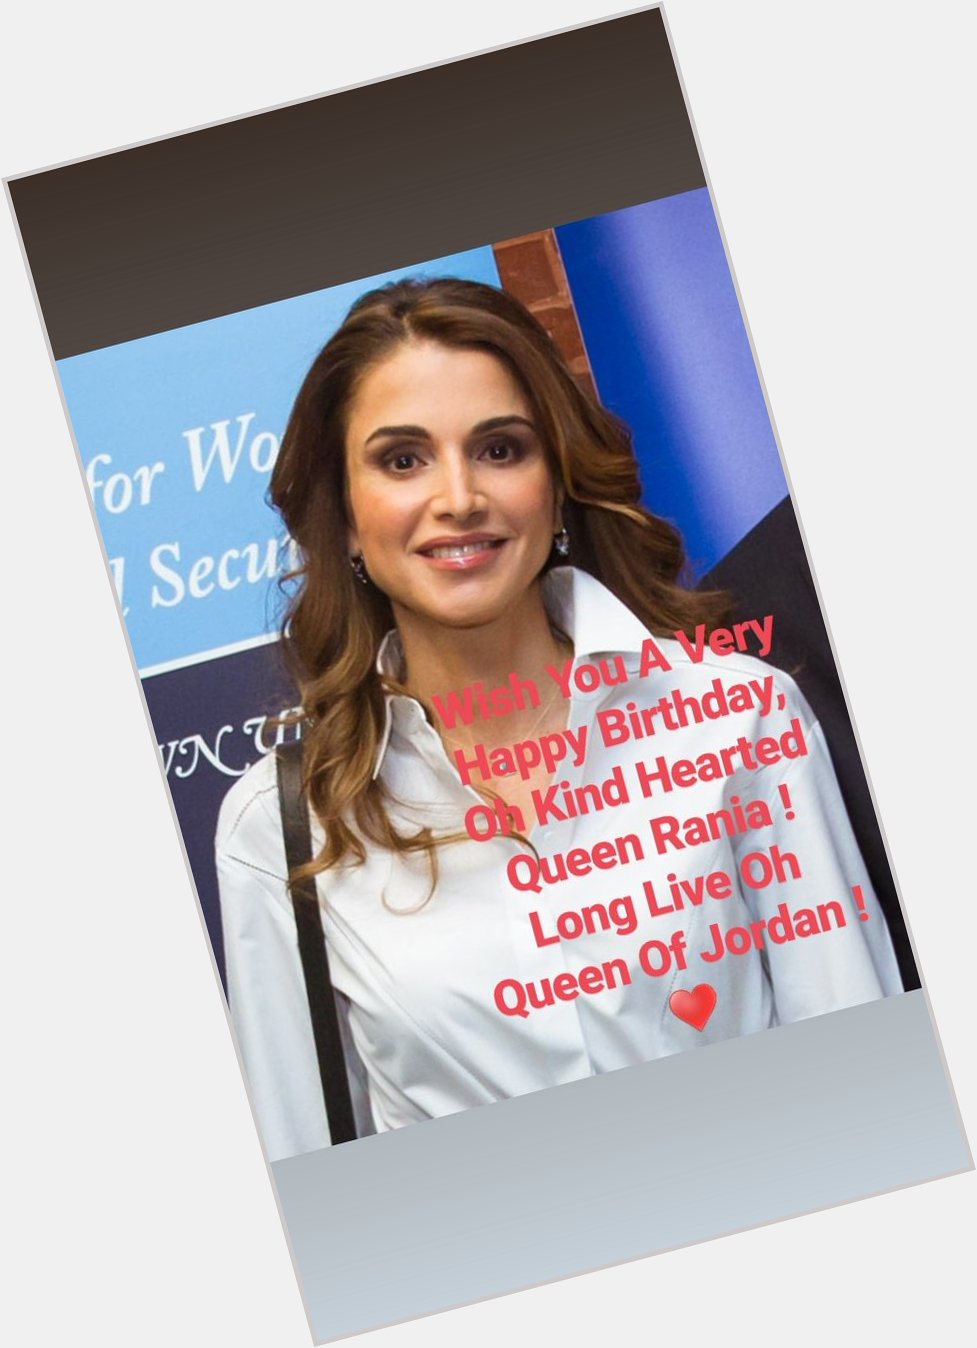      WISH YOU A VERY HAPPY BIRTHDAY, OH QUEEN RANIA ! STAY BLESSED, STAY HAPPY !     . 